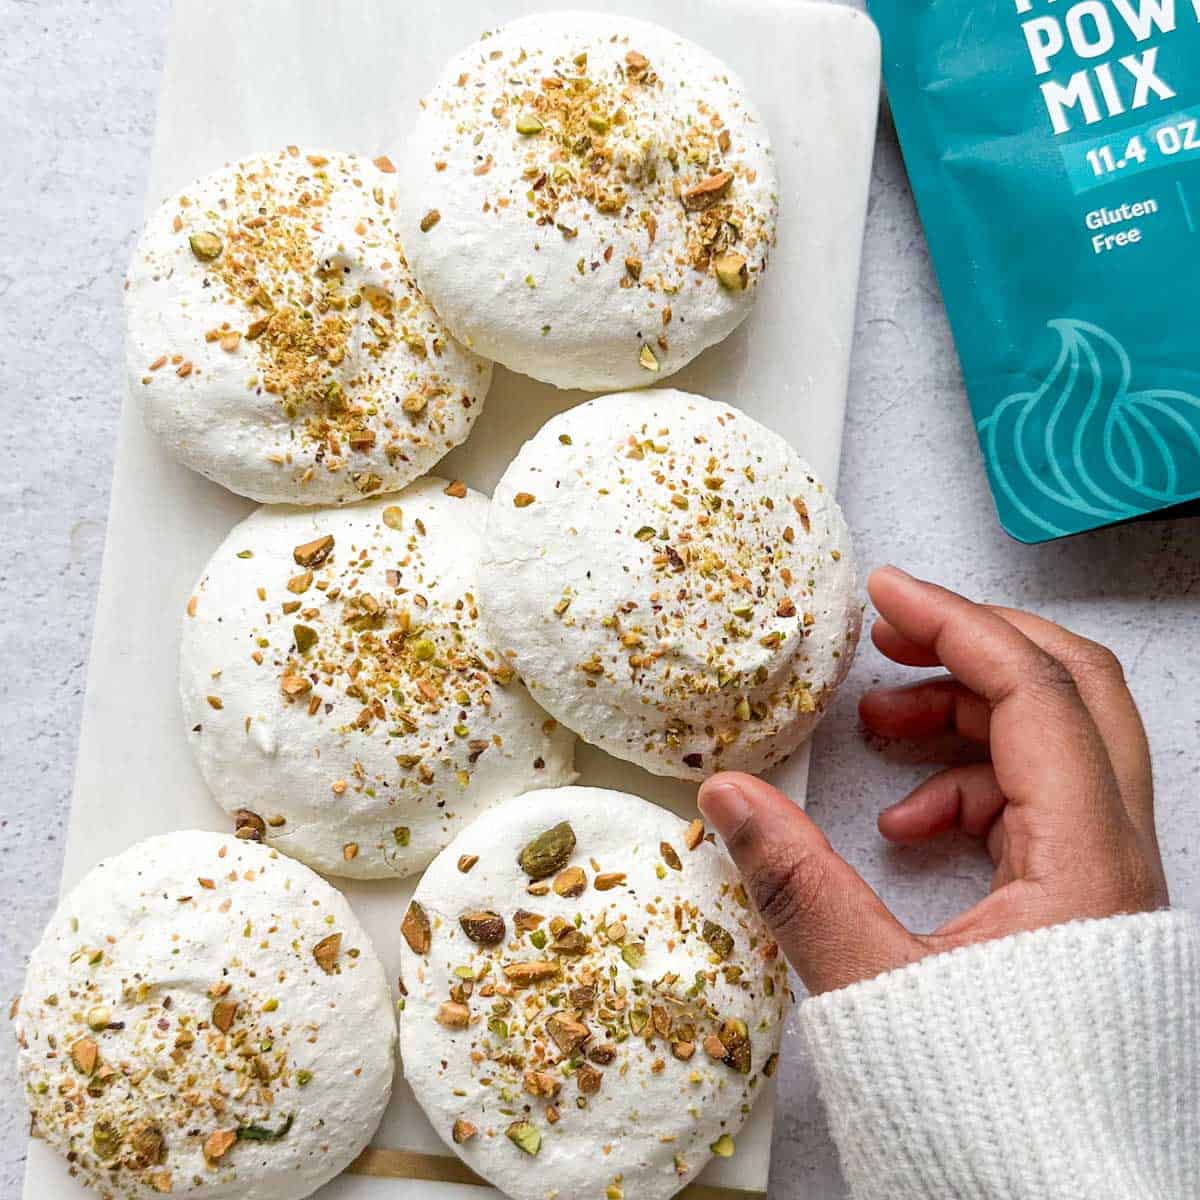 Saffron Pistachio Meringue Cookies on a white tray. A hand is reaching for a cookie and a bag of meringue mix is in the background.